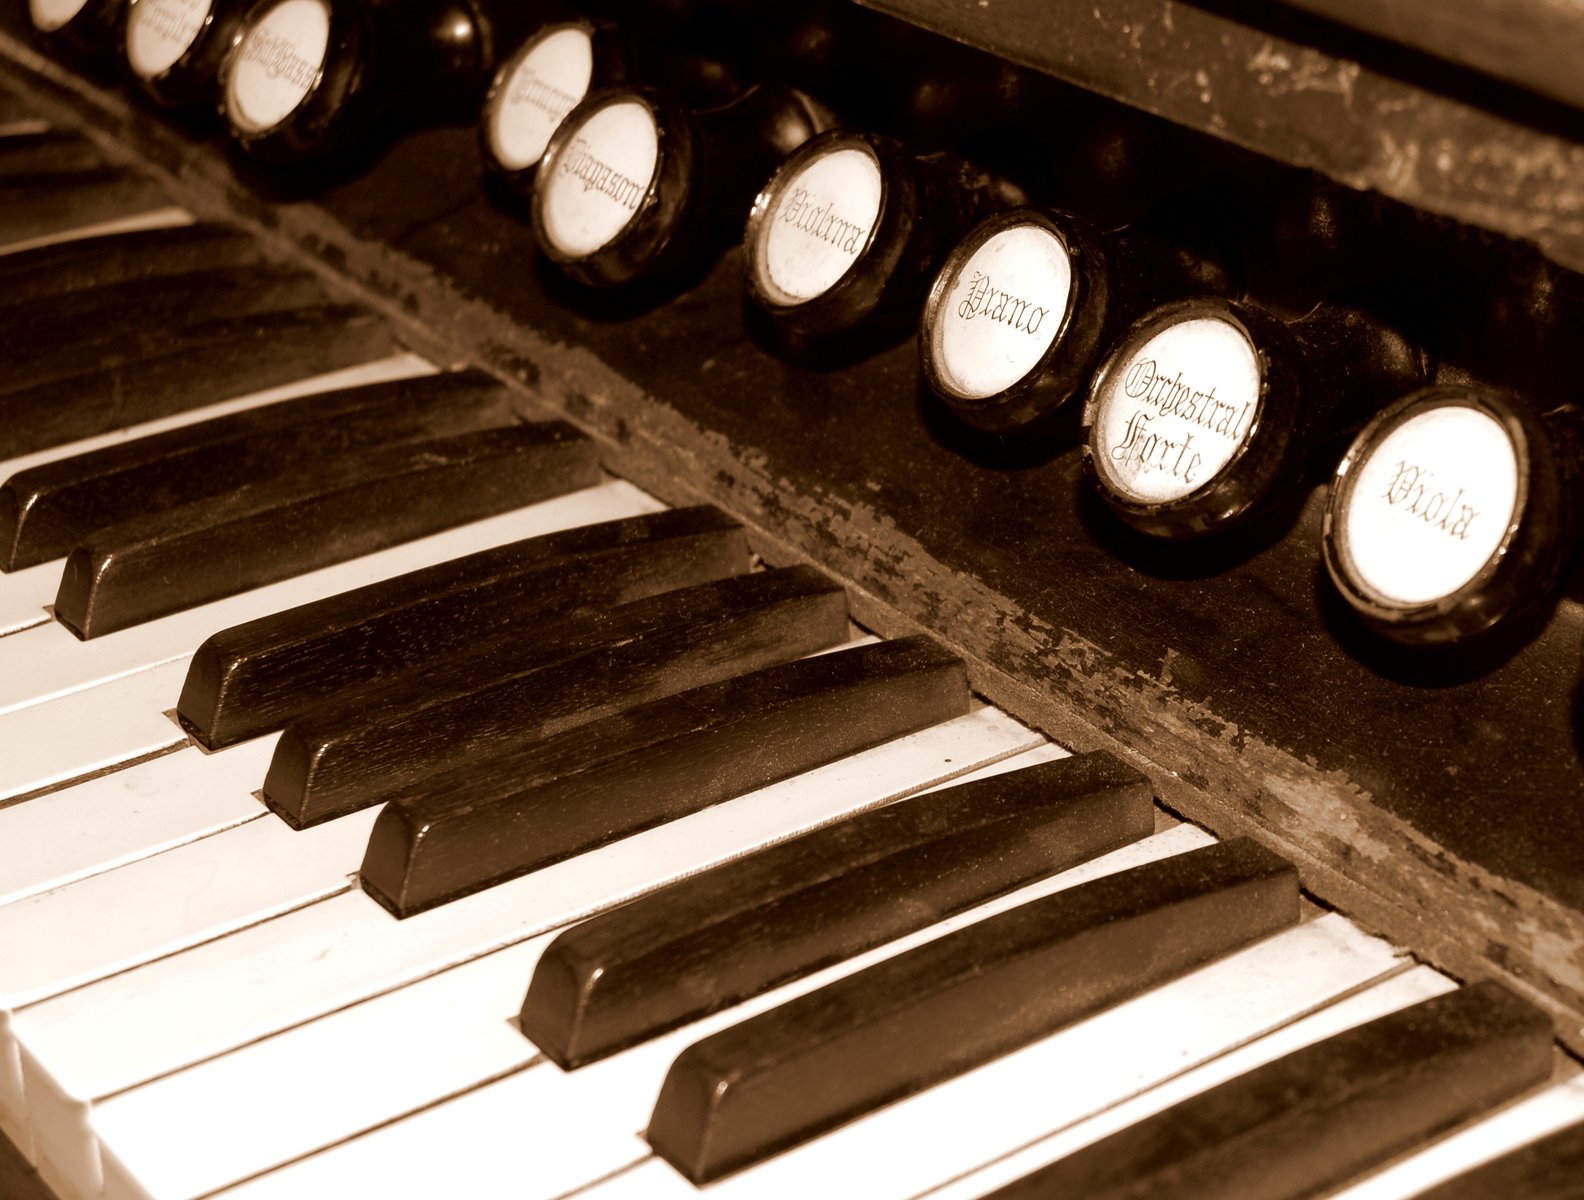 there is an old piano with many s